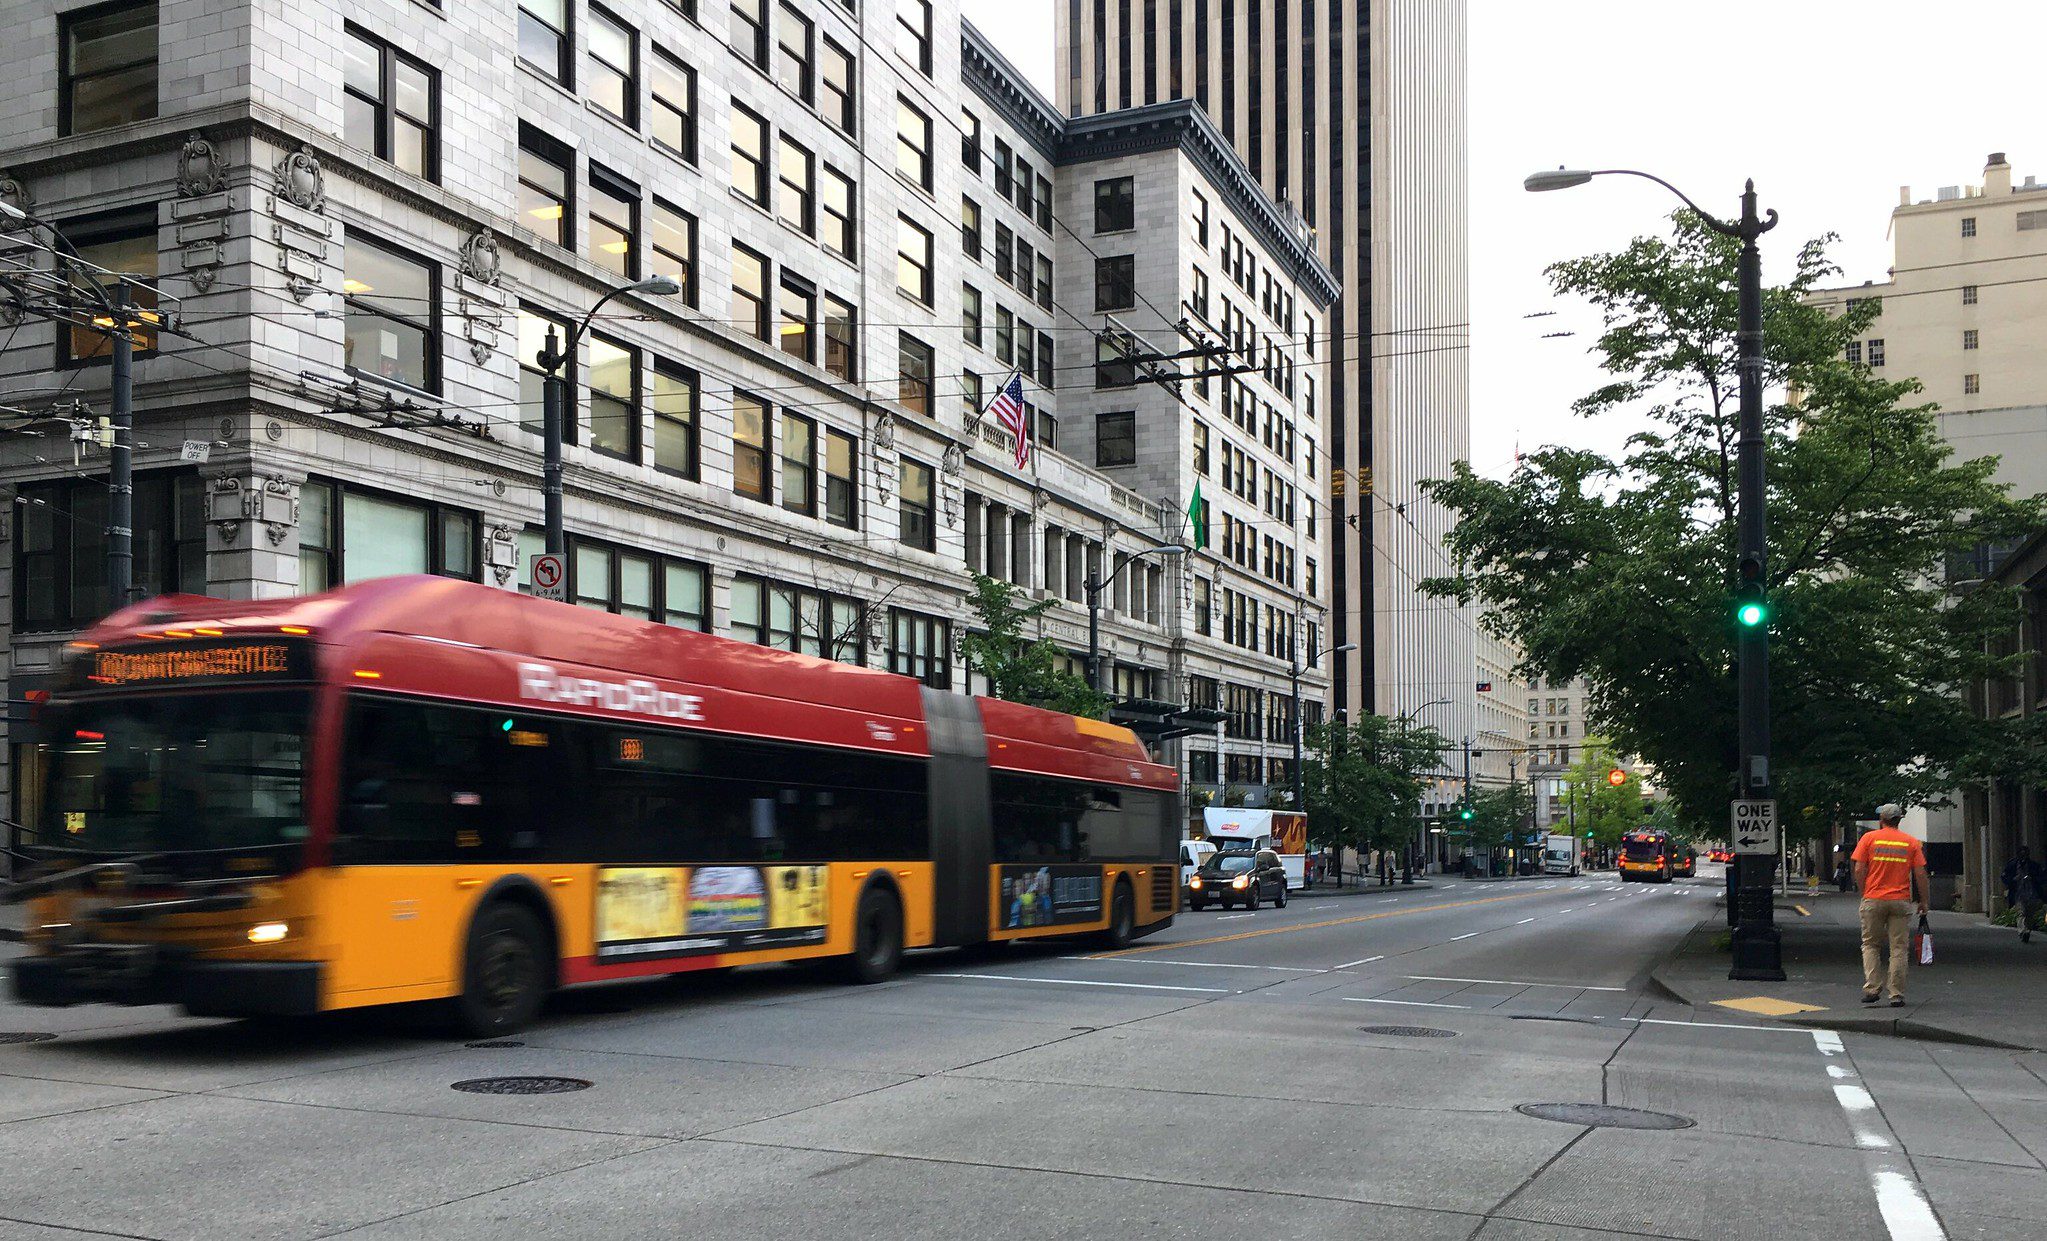 A King County Metro RapidRide bus travels through downtown Seattle on 3rd Ave.